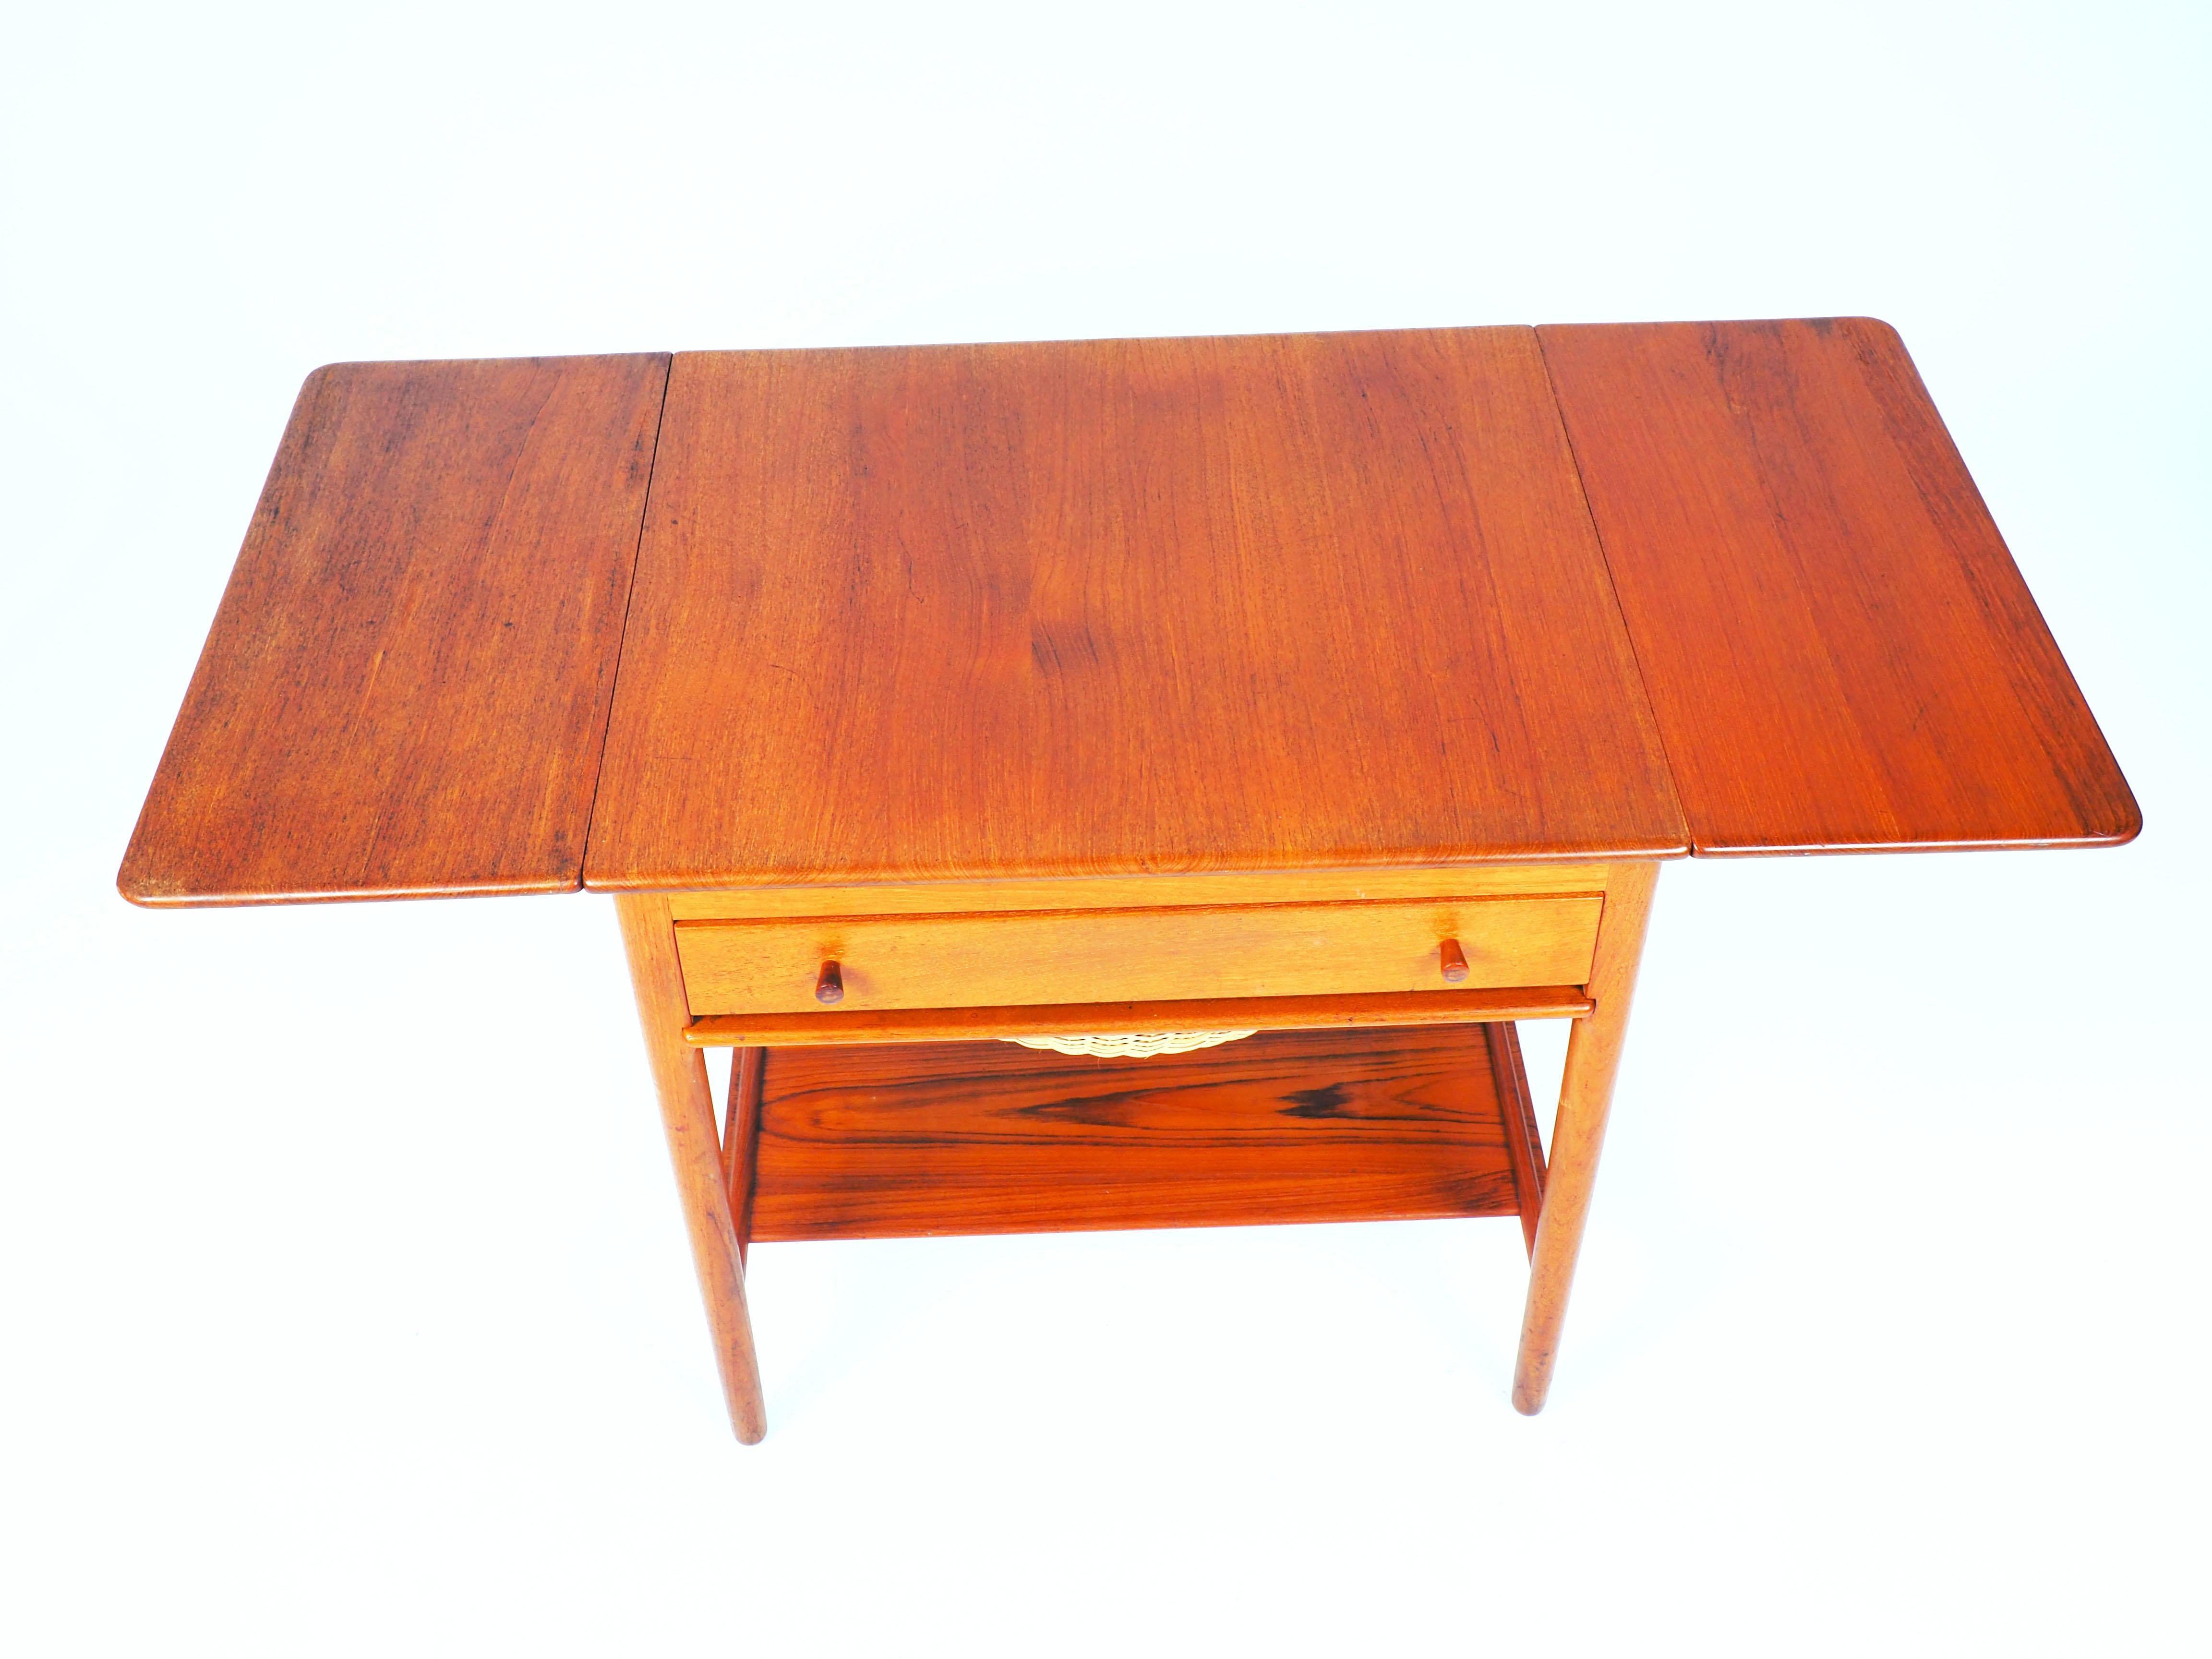 Mid-20th Century Sewing table AT-33 by Hans J Wegner made by Andreas Tuck, Denmark